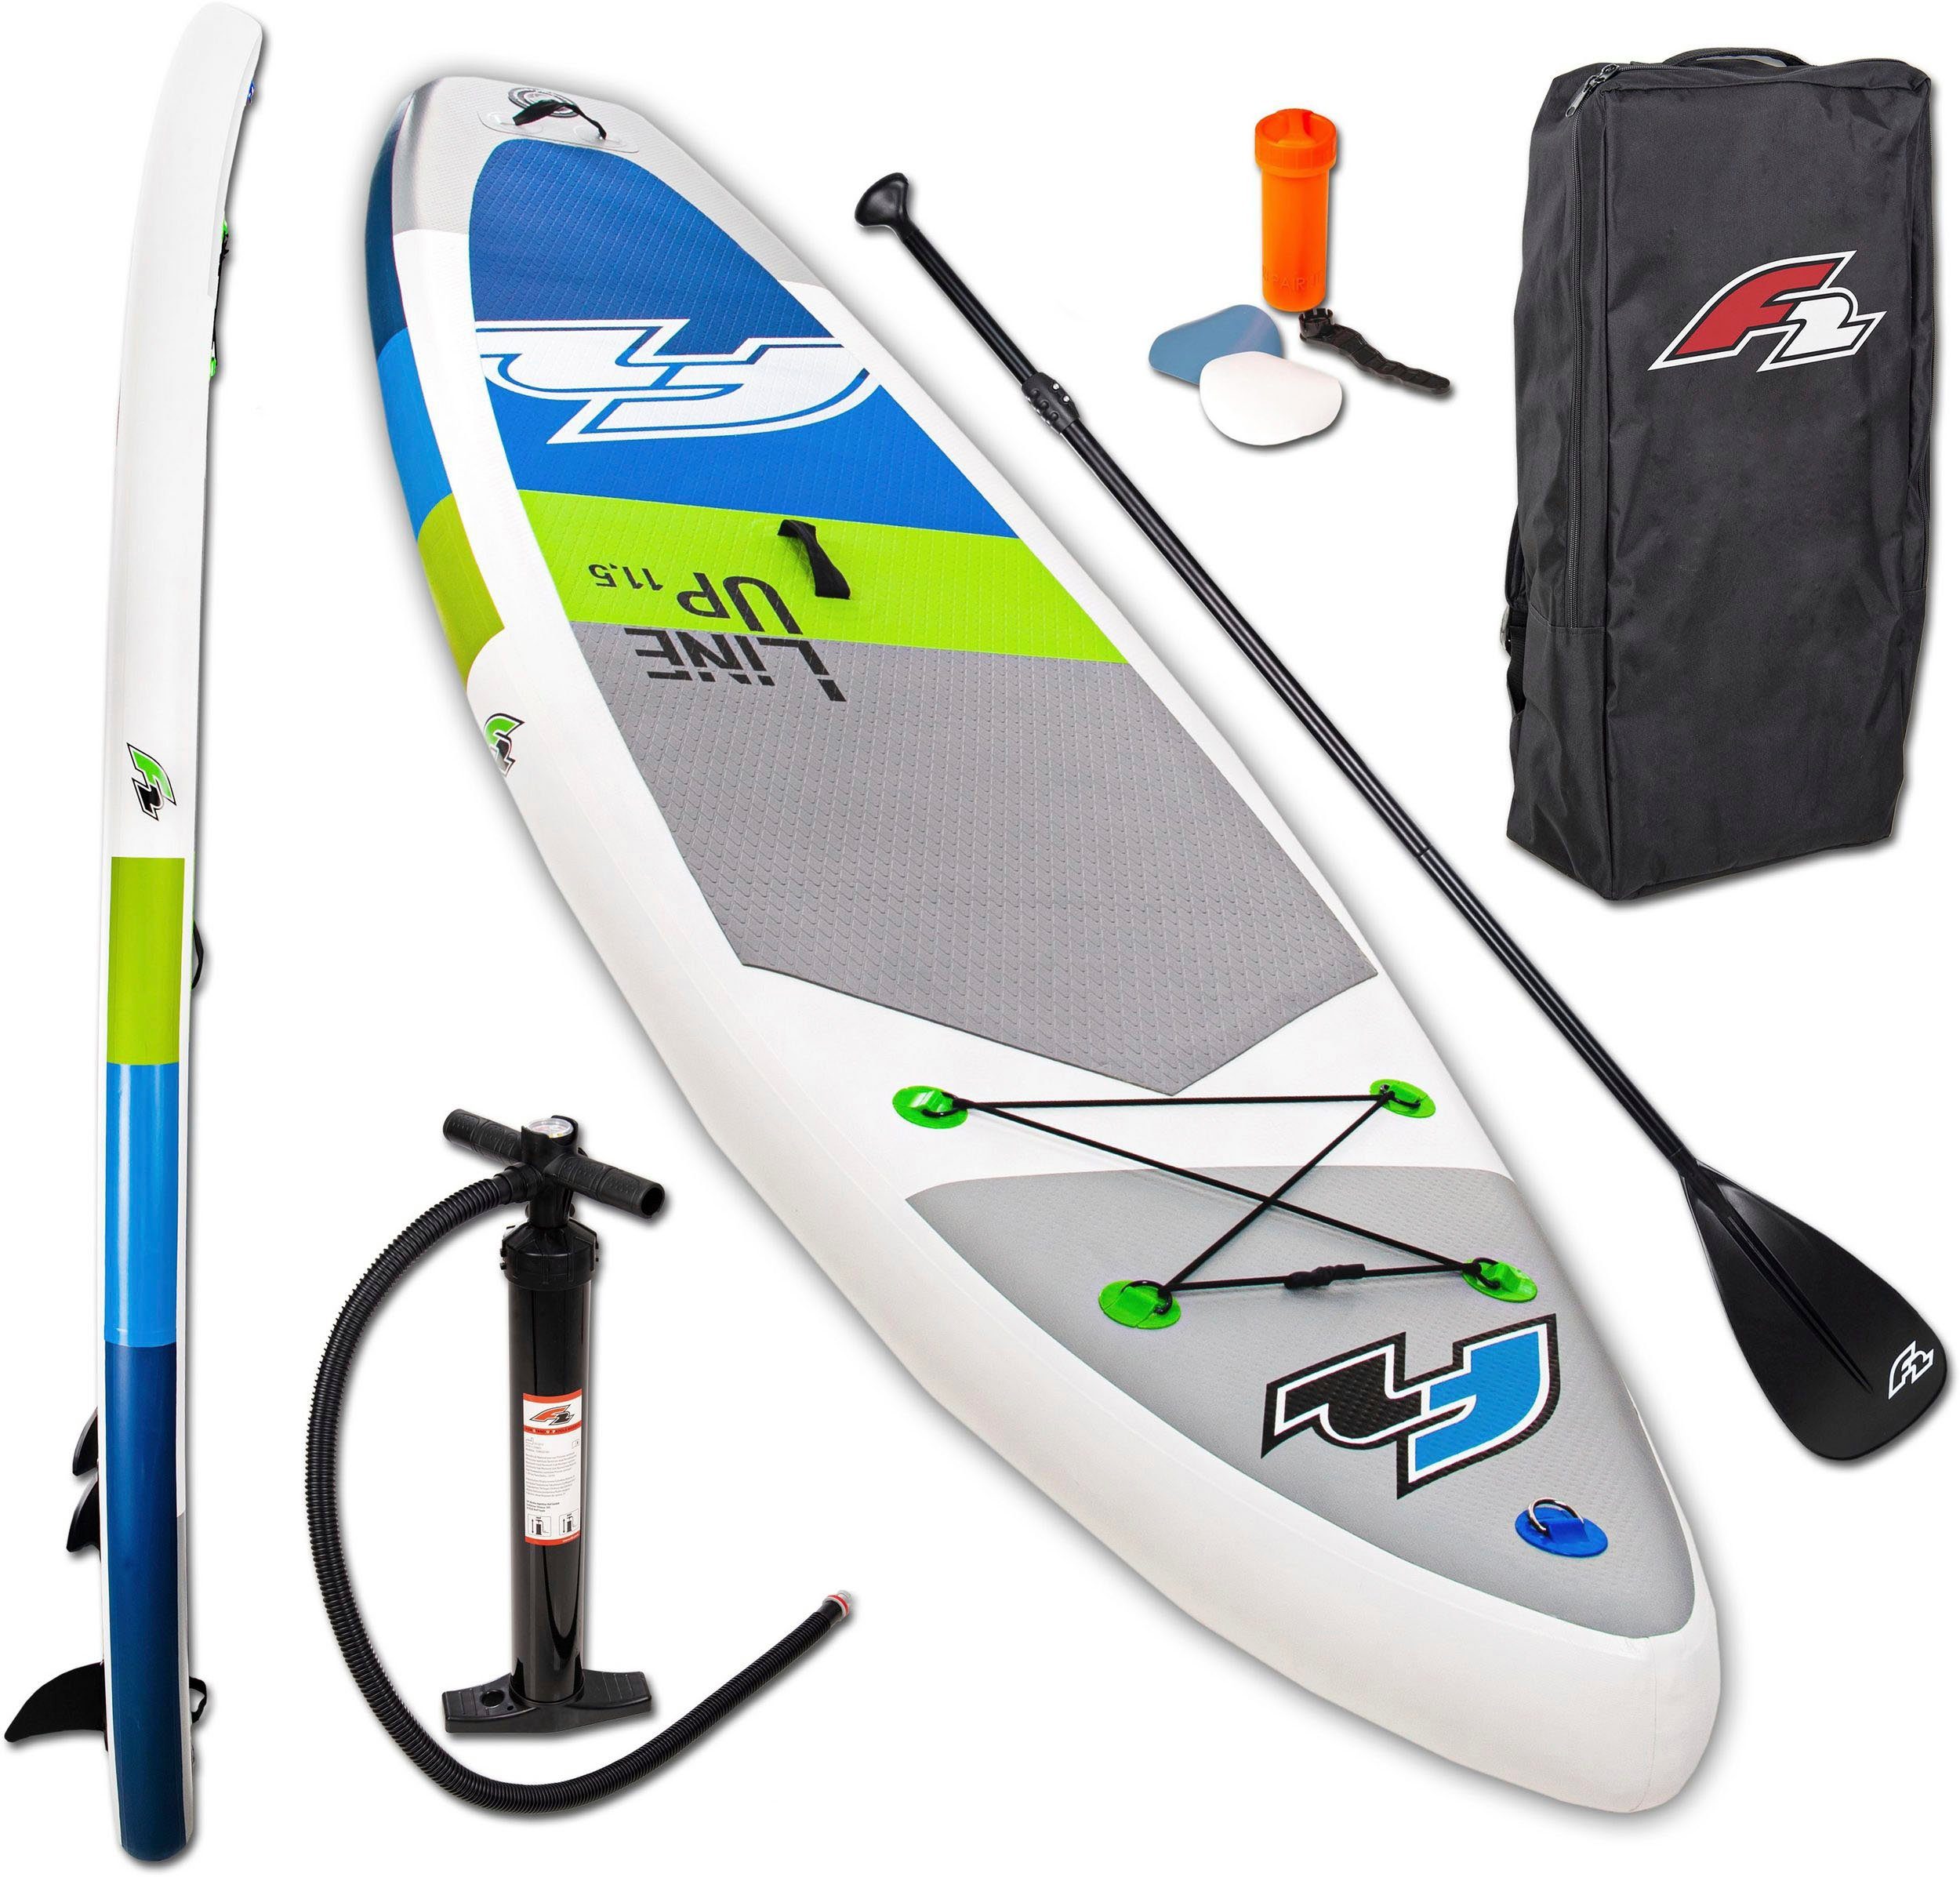 SUP-Board F2 Up F2 SMO Stand (Set, Up tlg), blue Paddling mit Inflatable 5 Line Alupaddel,